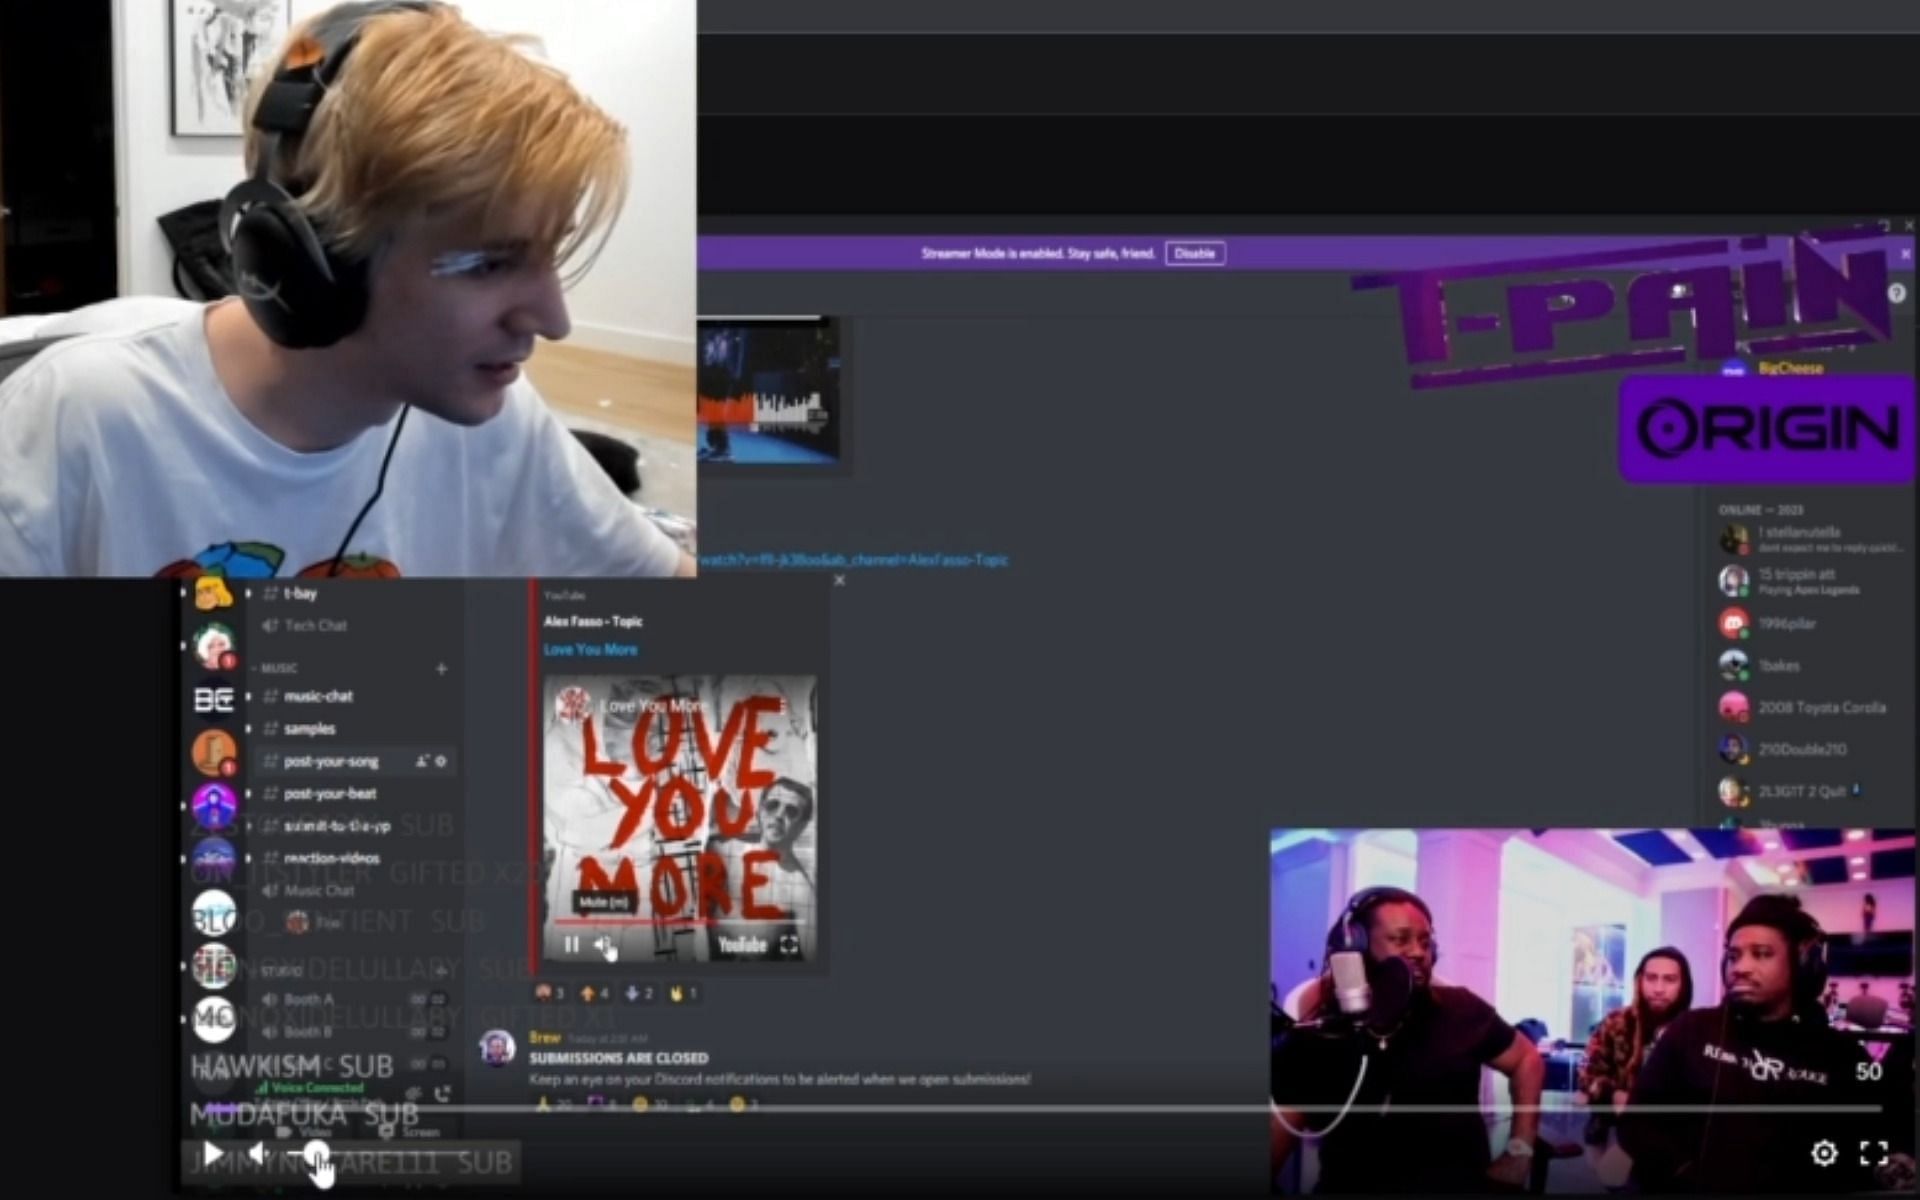 xQc angrily asks T-Pain to change his stream set-up (Image via Twitch/xQc)